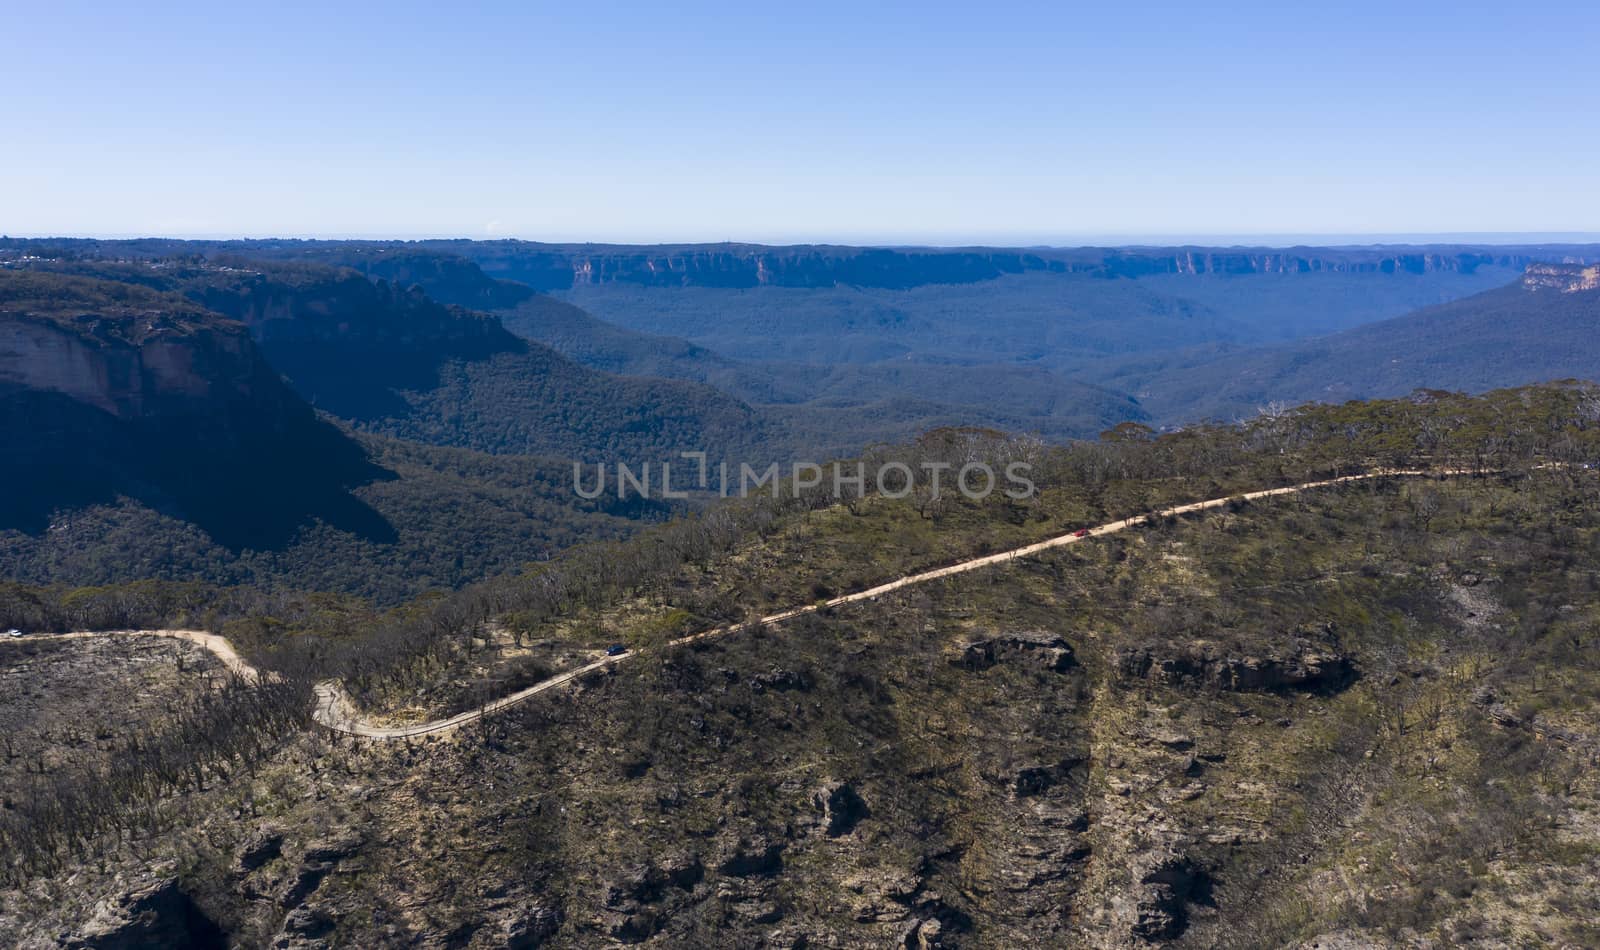 Narrow Neck Plateau near Katoomba in The Blue Mountains in New South Wales in Australia